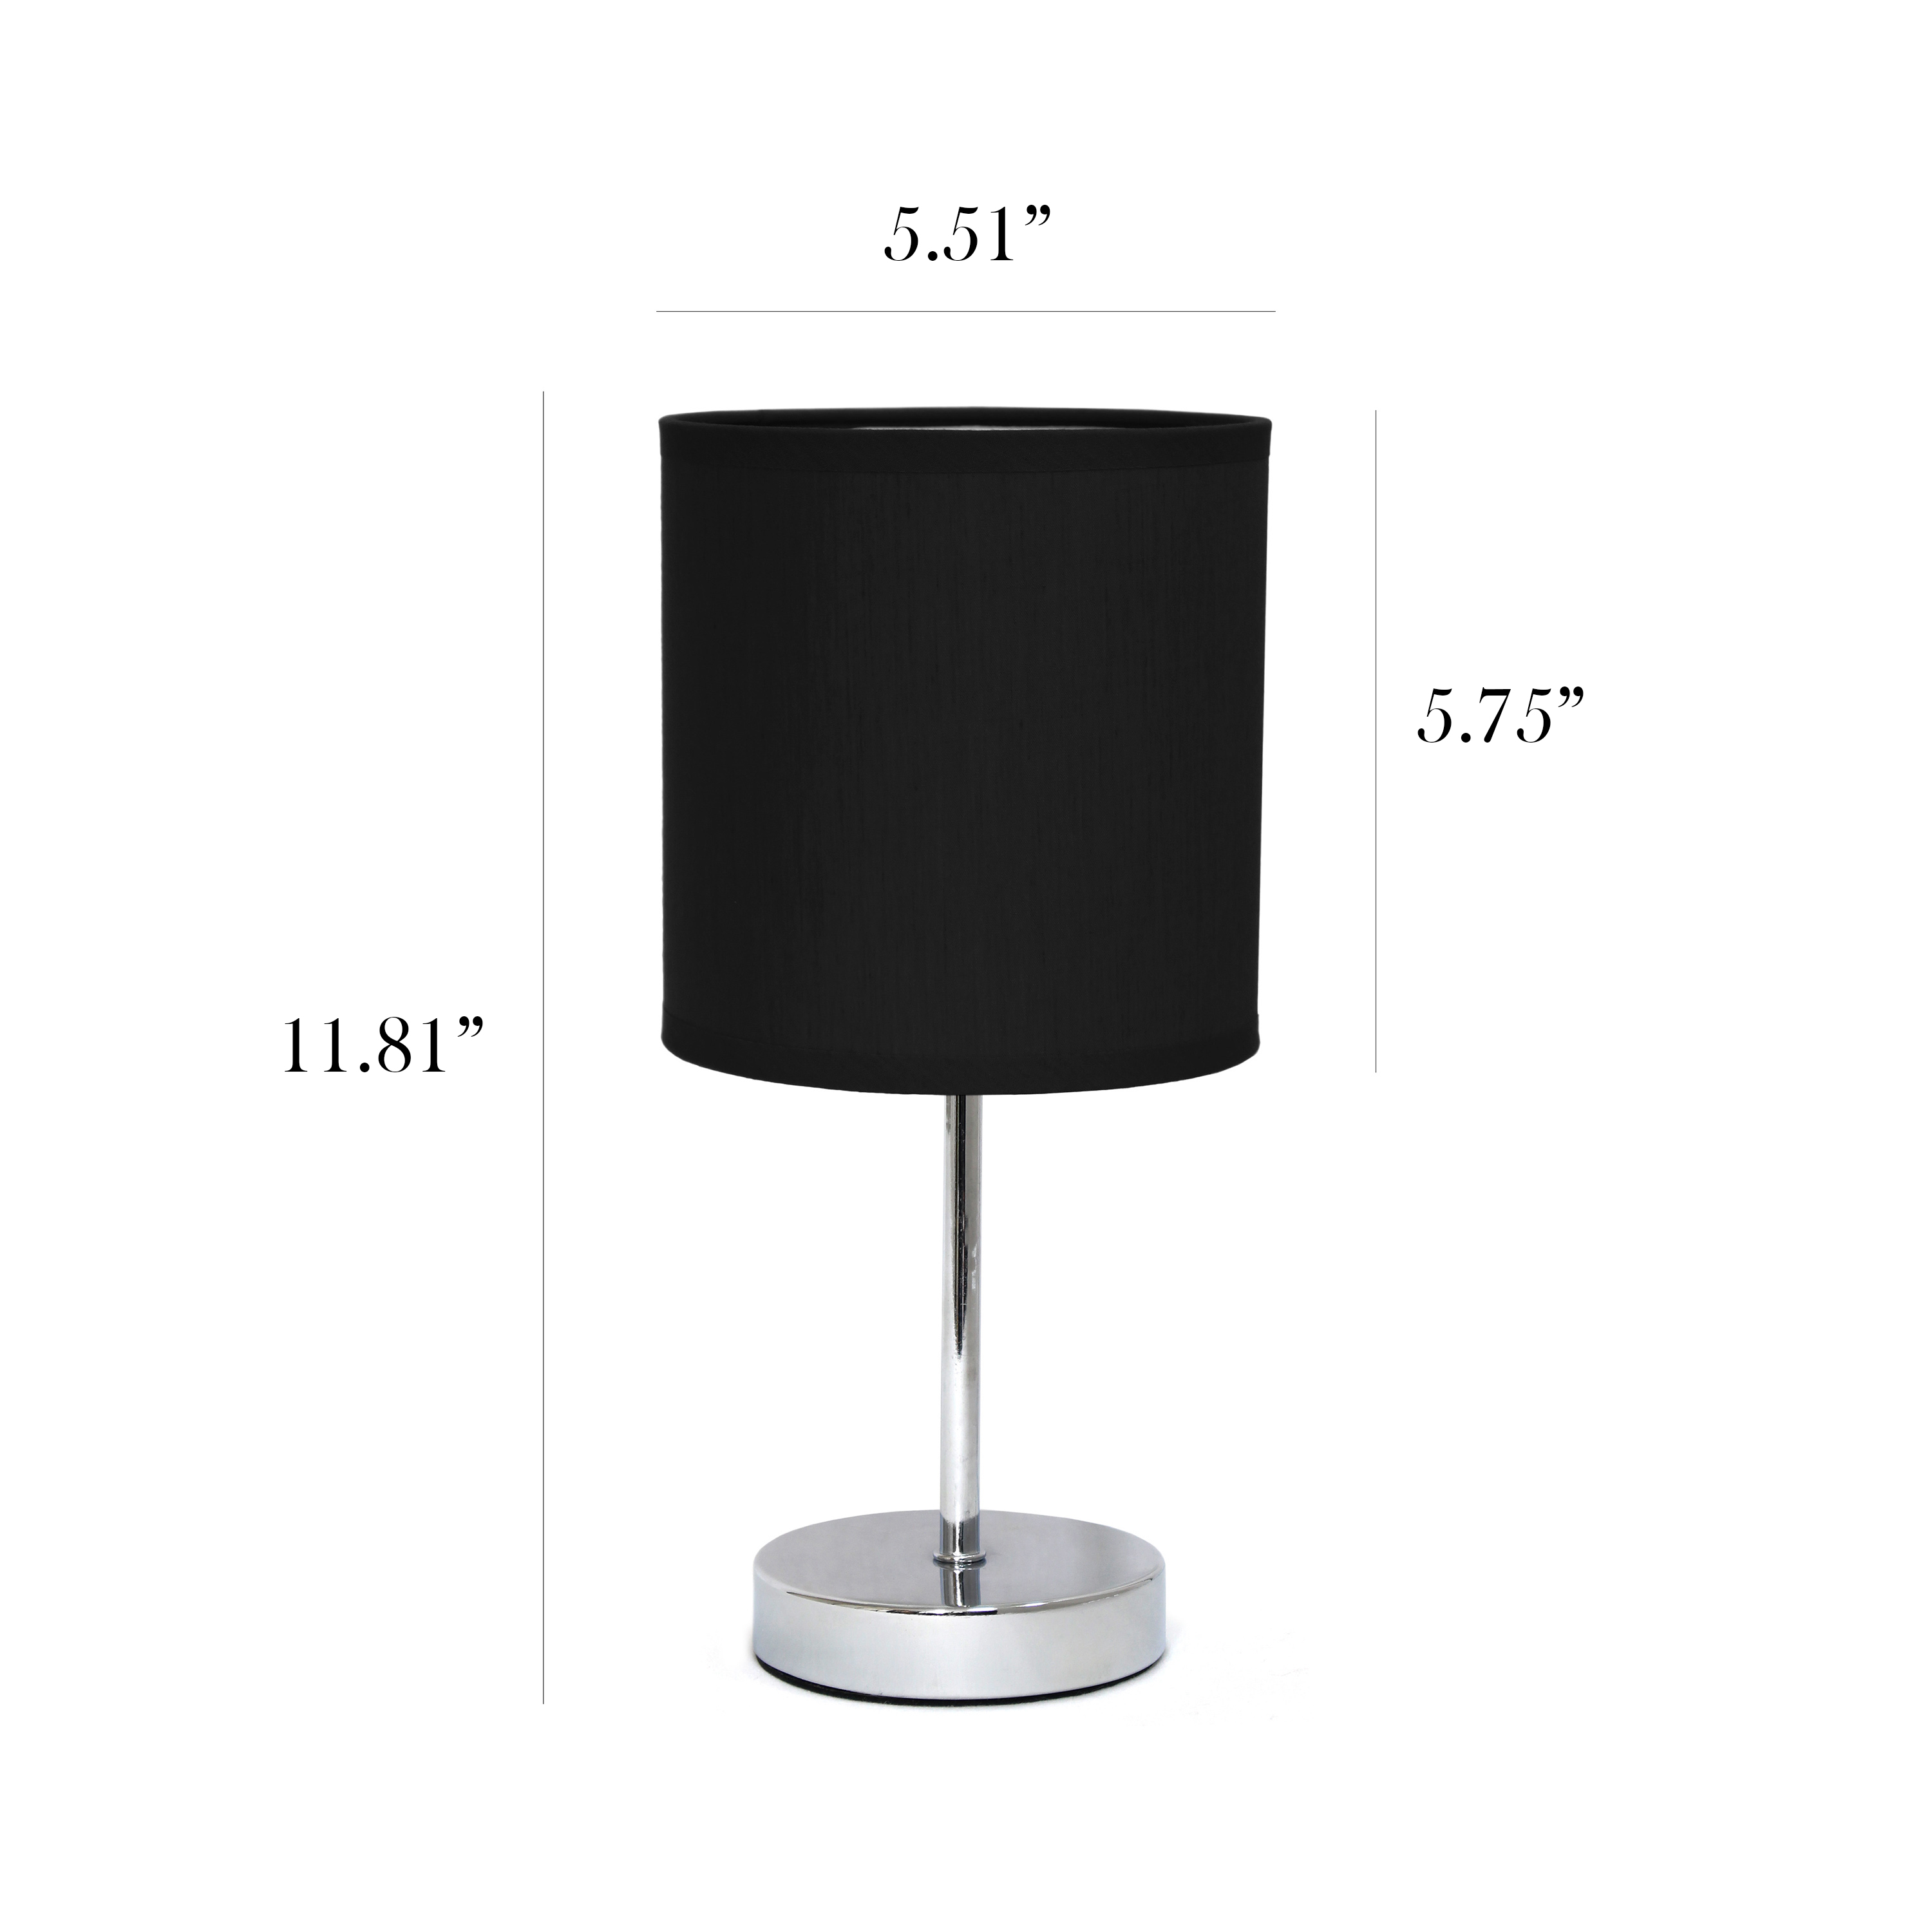 Simple Designs 11.81" 2-Pack Basic Chrome Mini Table Lamp Set with Fabric Shades, Black - image 3 of 6